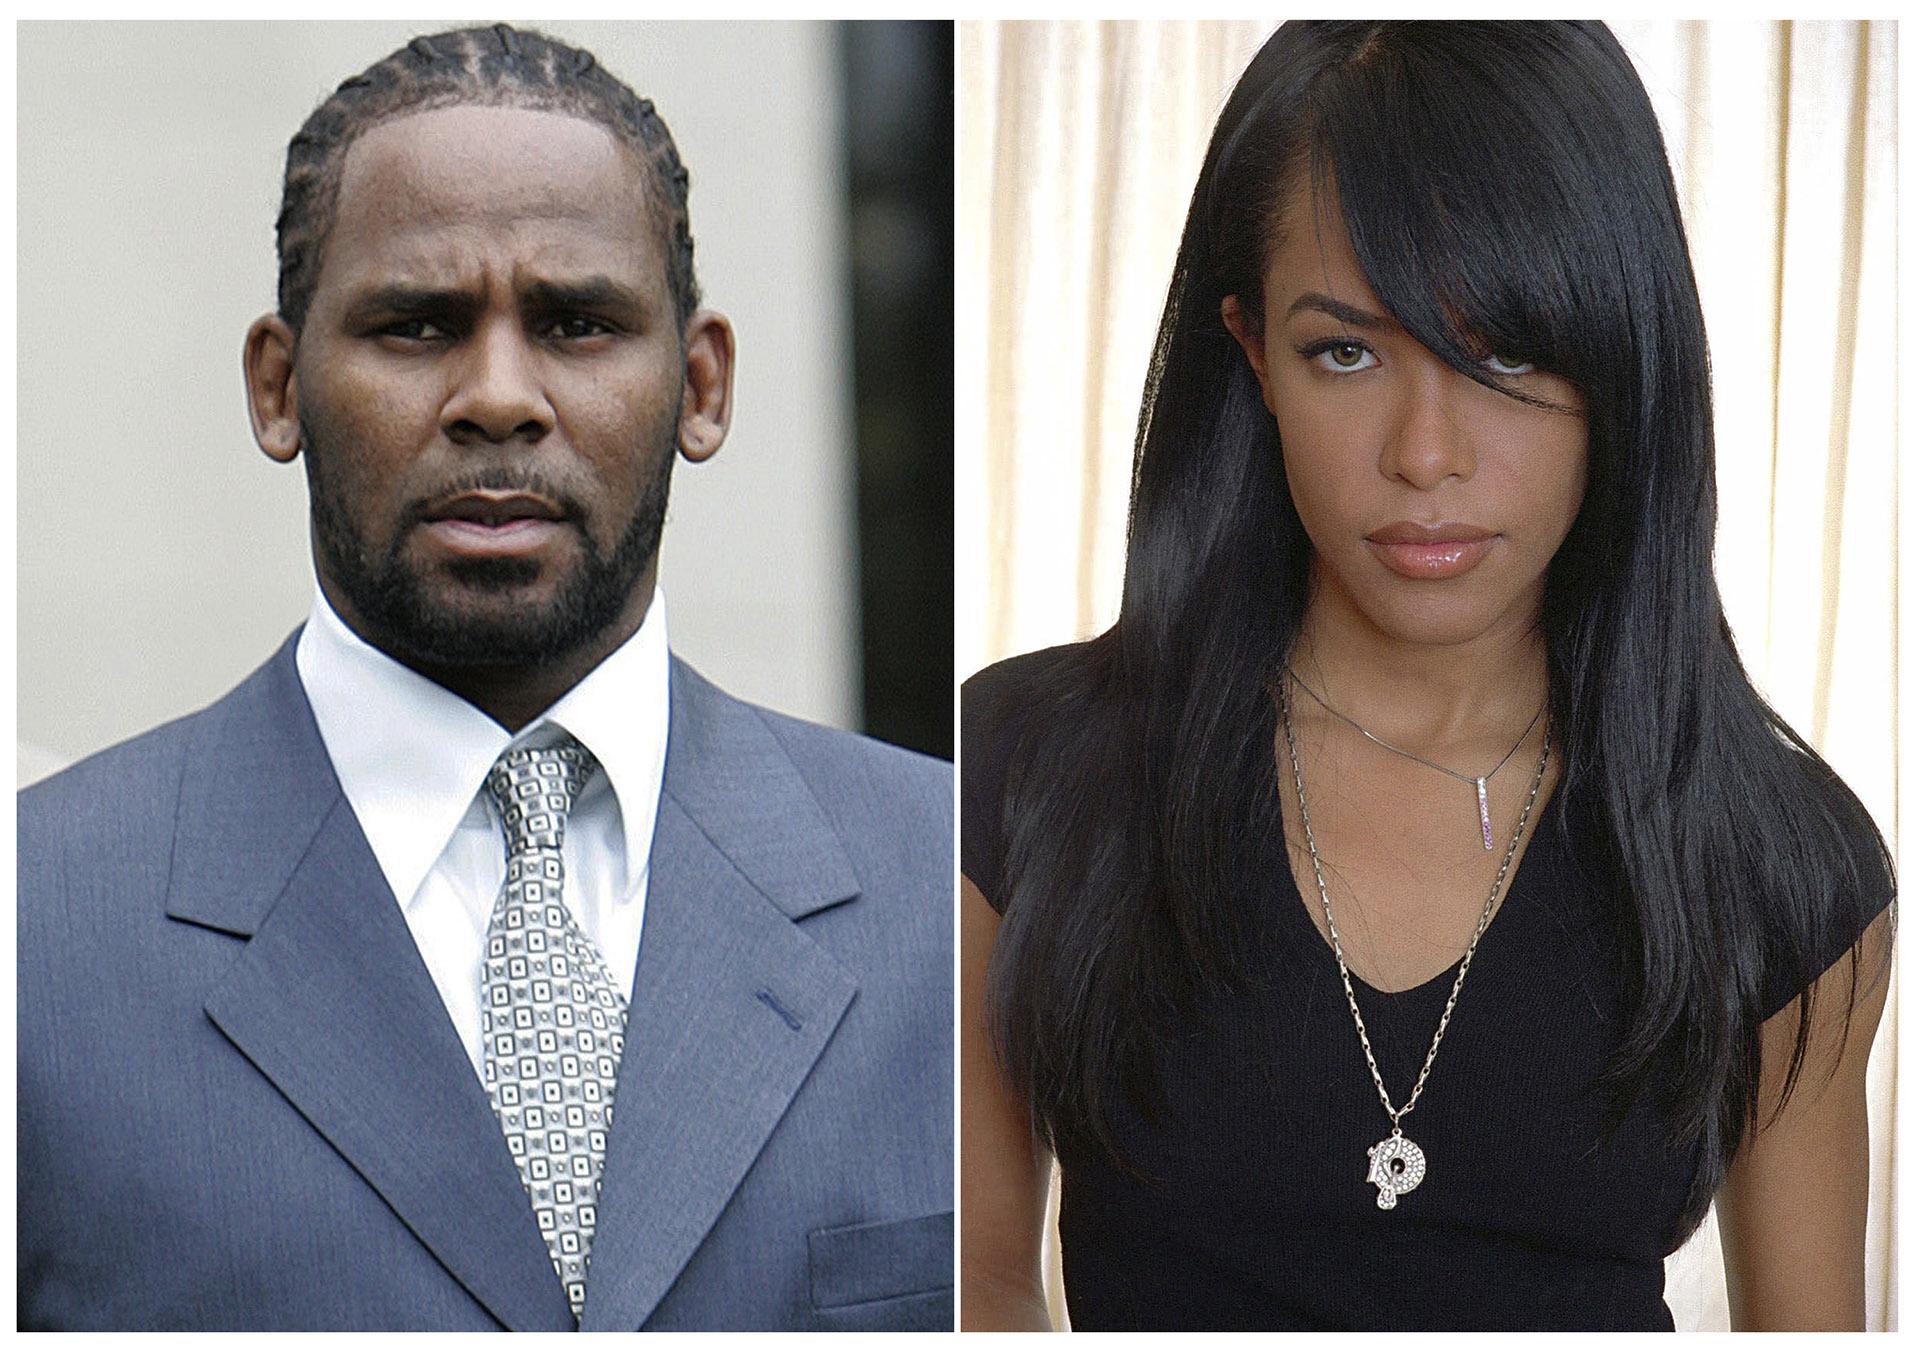 This combination photo shows singer R. Kelly after the first day of jury selection in his child pornography trial at the Cook County Criminal Courthouse in Chicago on May 9, 2008, left, the late R&B singer and actress Aaliyah during a photo shoot in New York on May 9, 2001. (AP Photo / File)